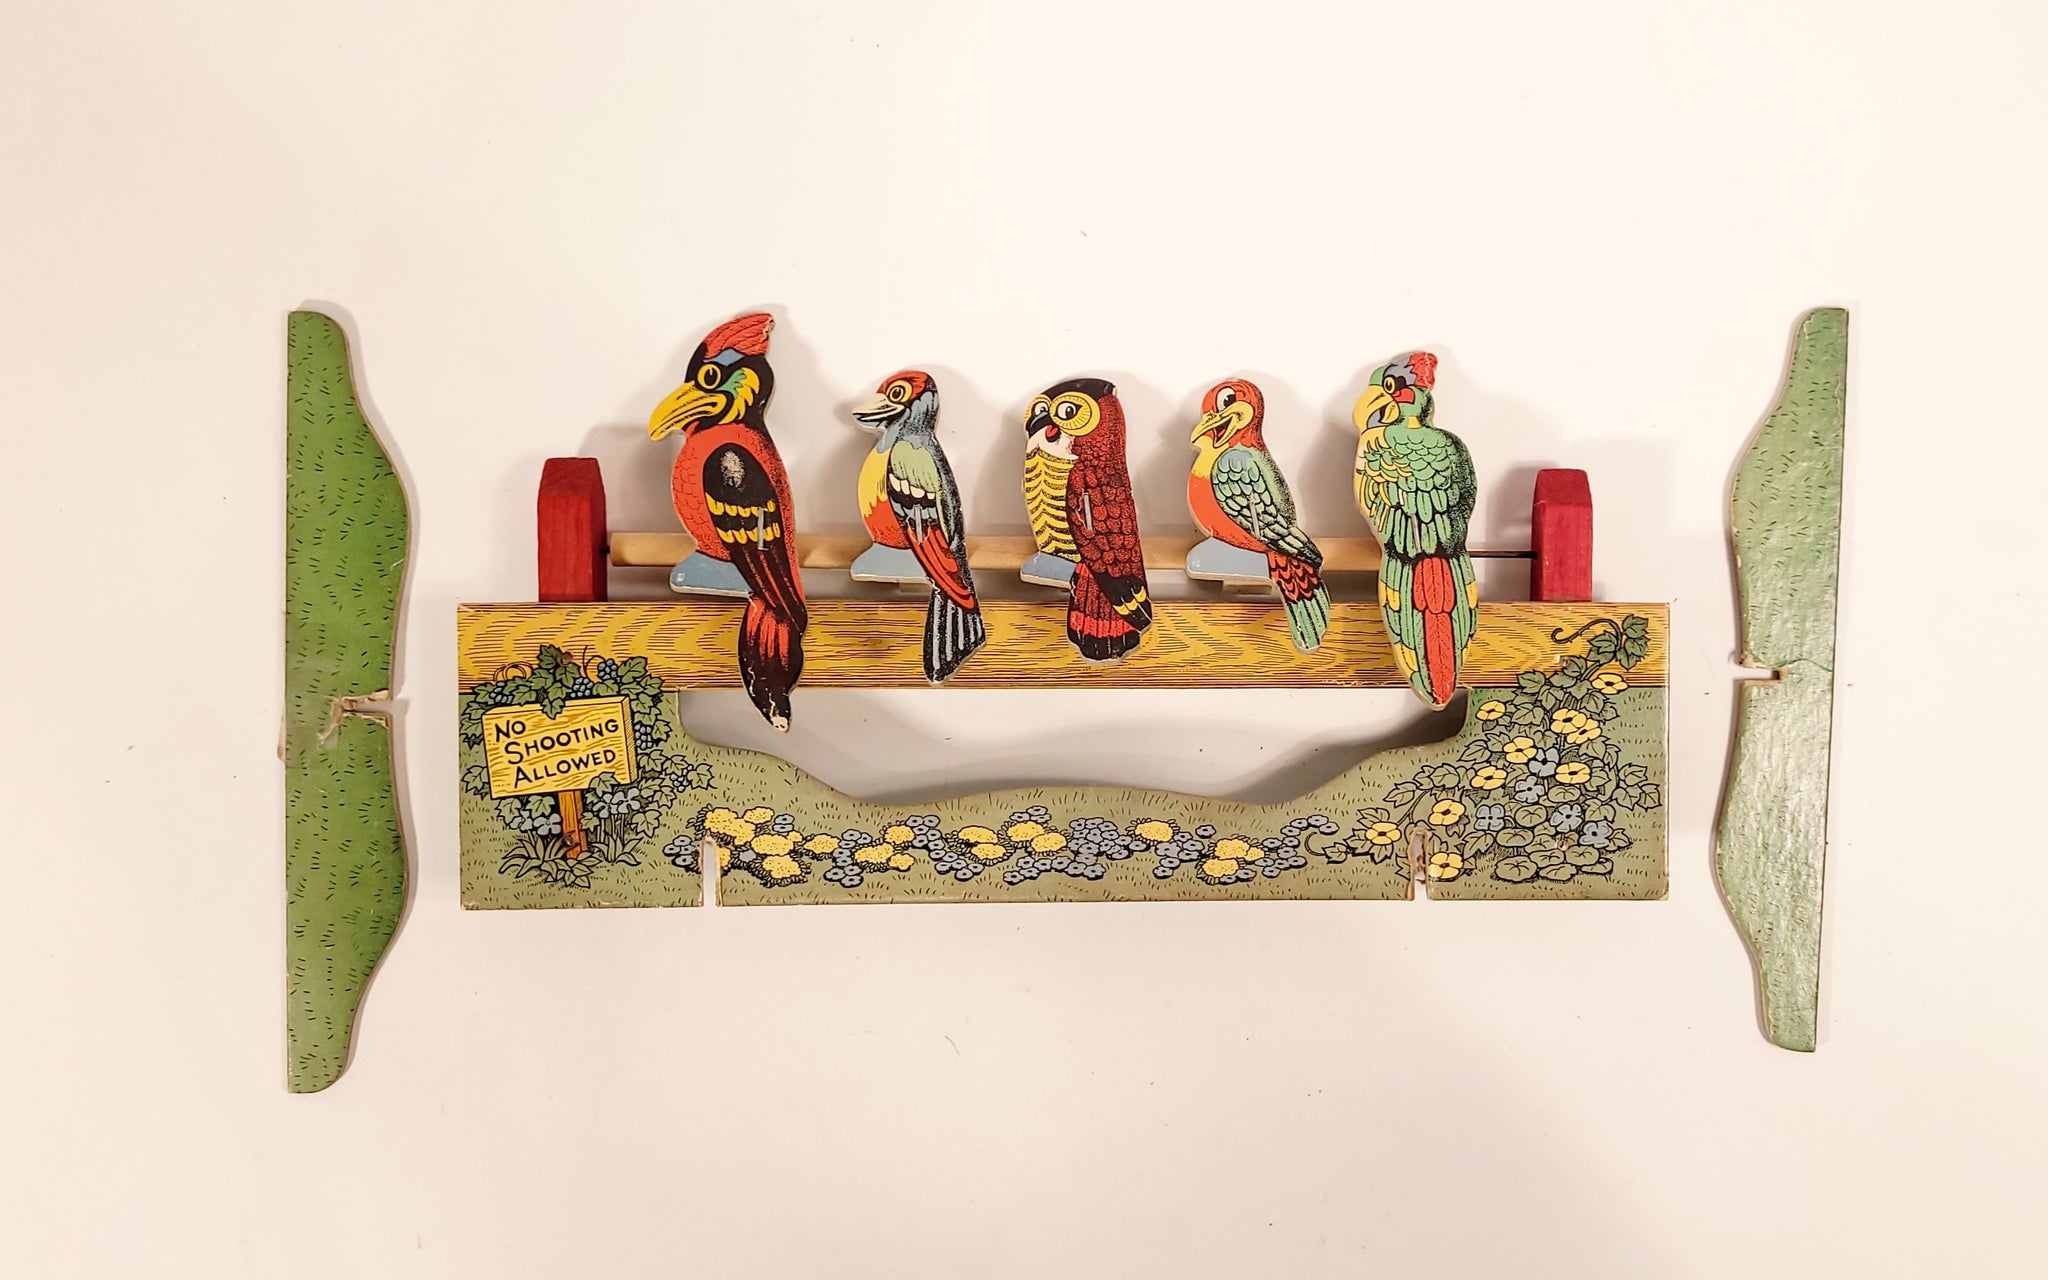 Vintage 1930s-1940s FIVE WISE BIRDS Childrens SHOOTING GAME, Parker